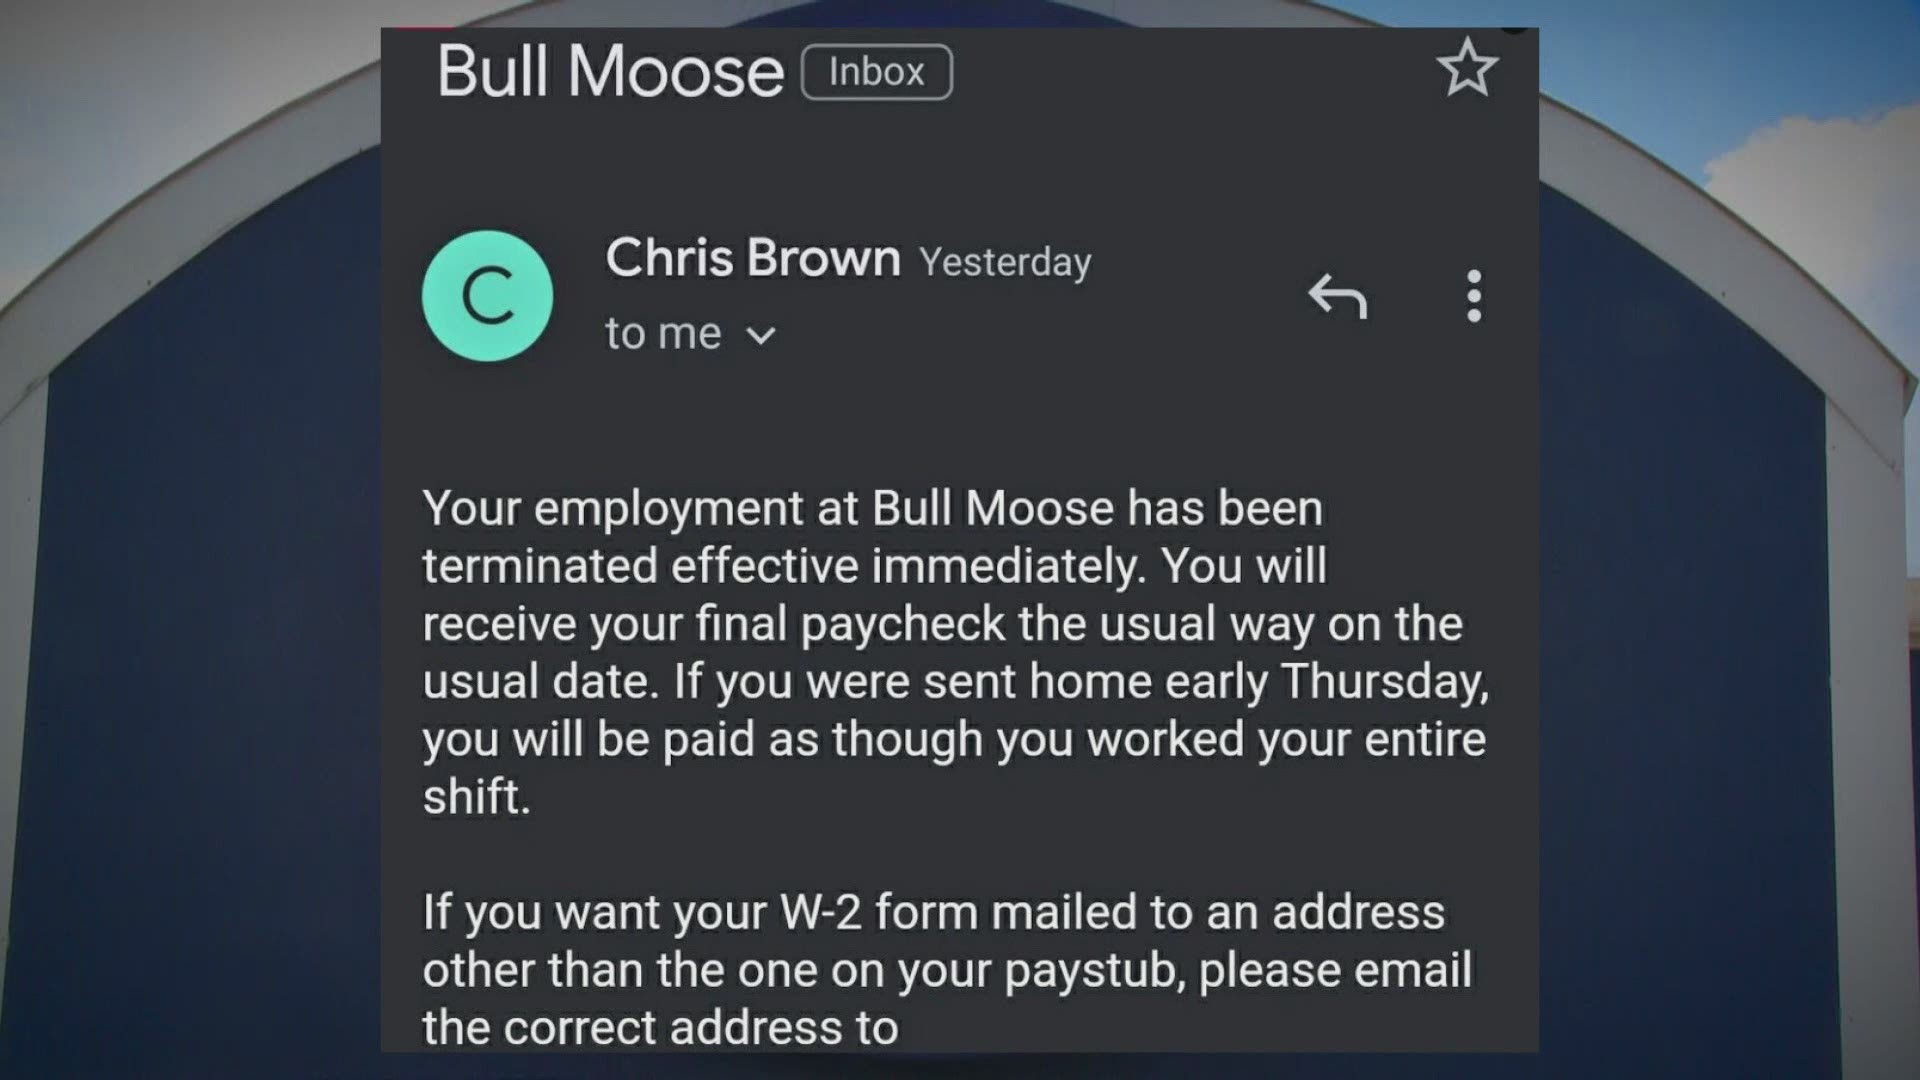 Bull Moose CFO, Chris Brown, says he cannot comment on any terminations.